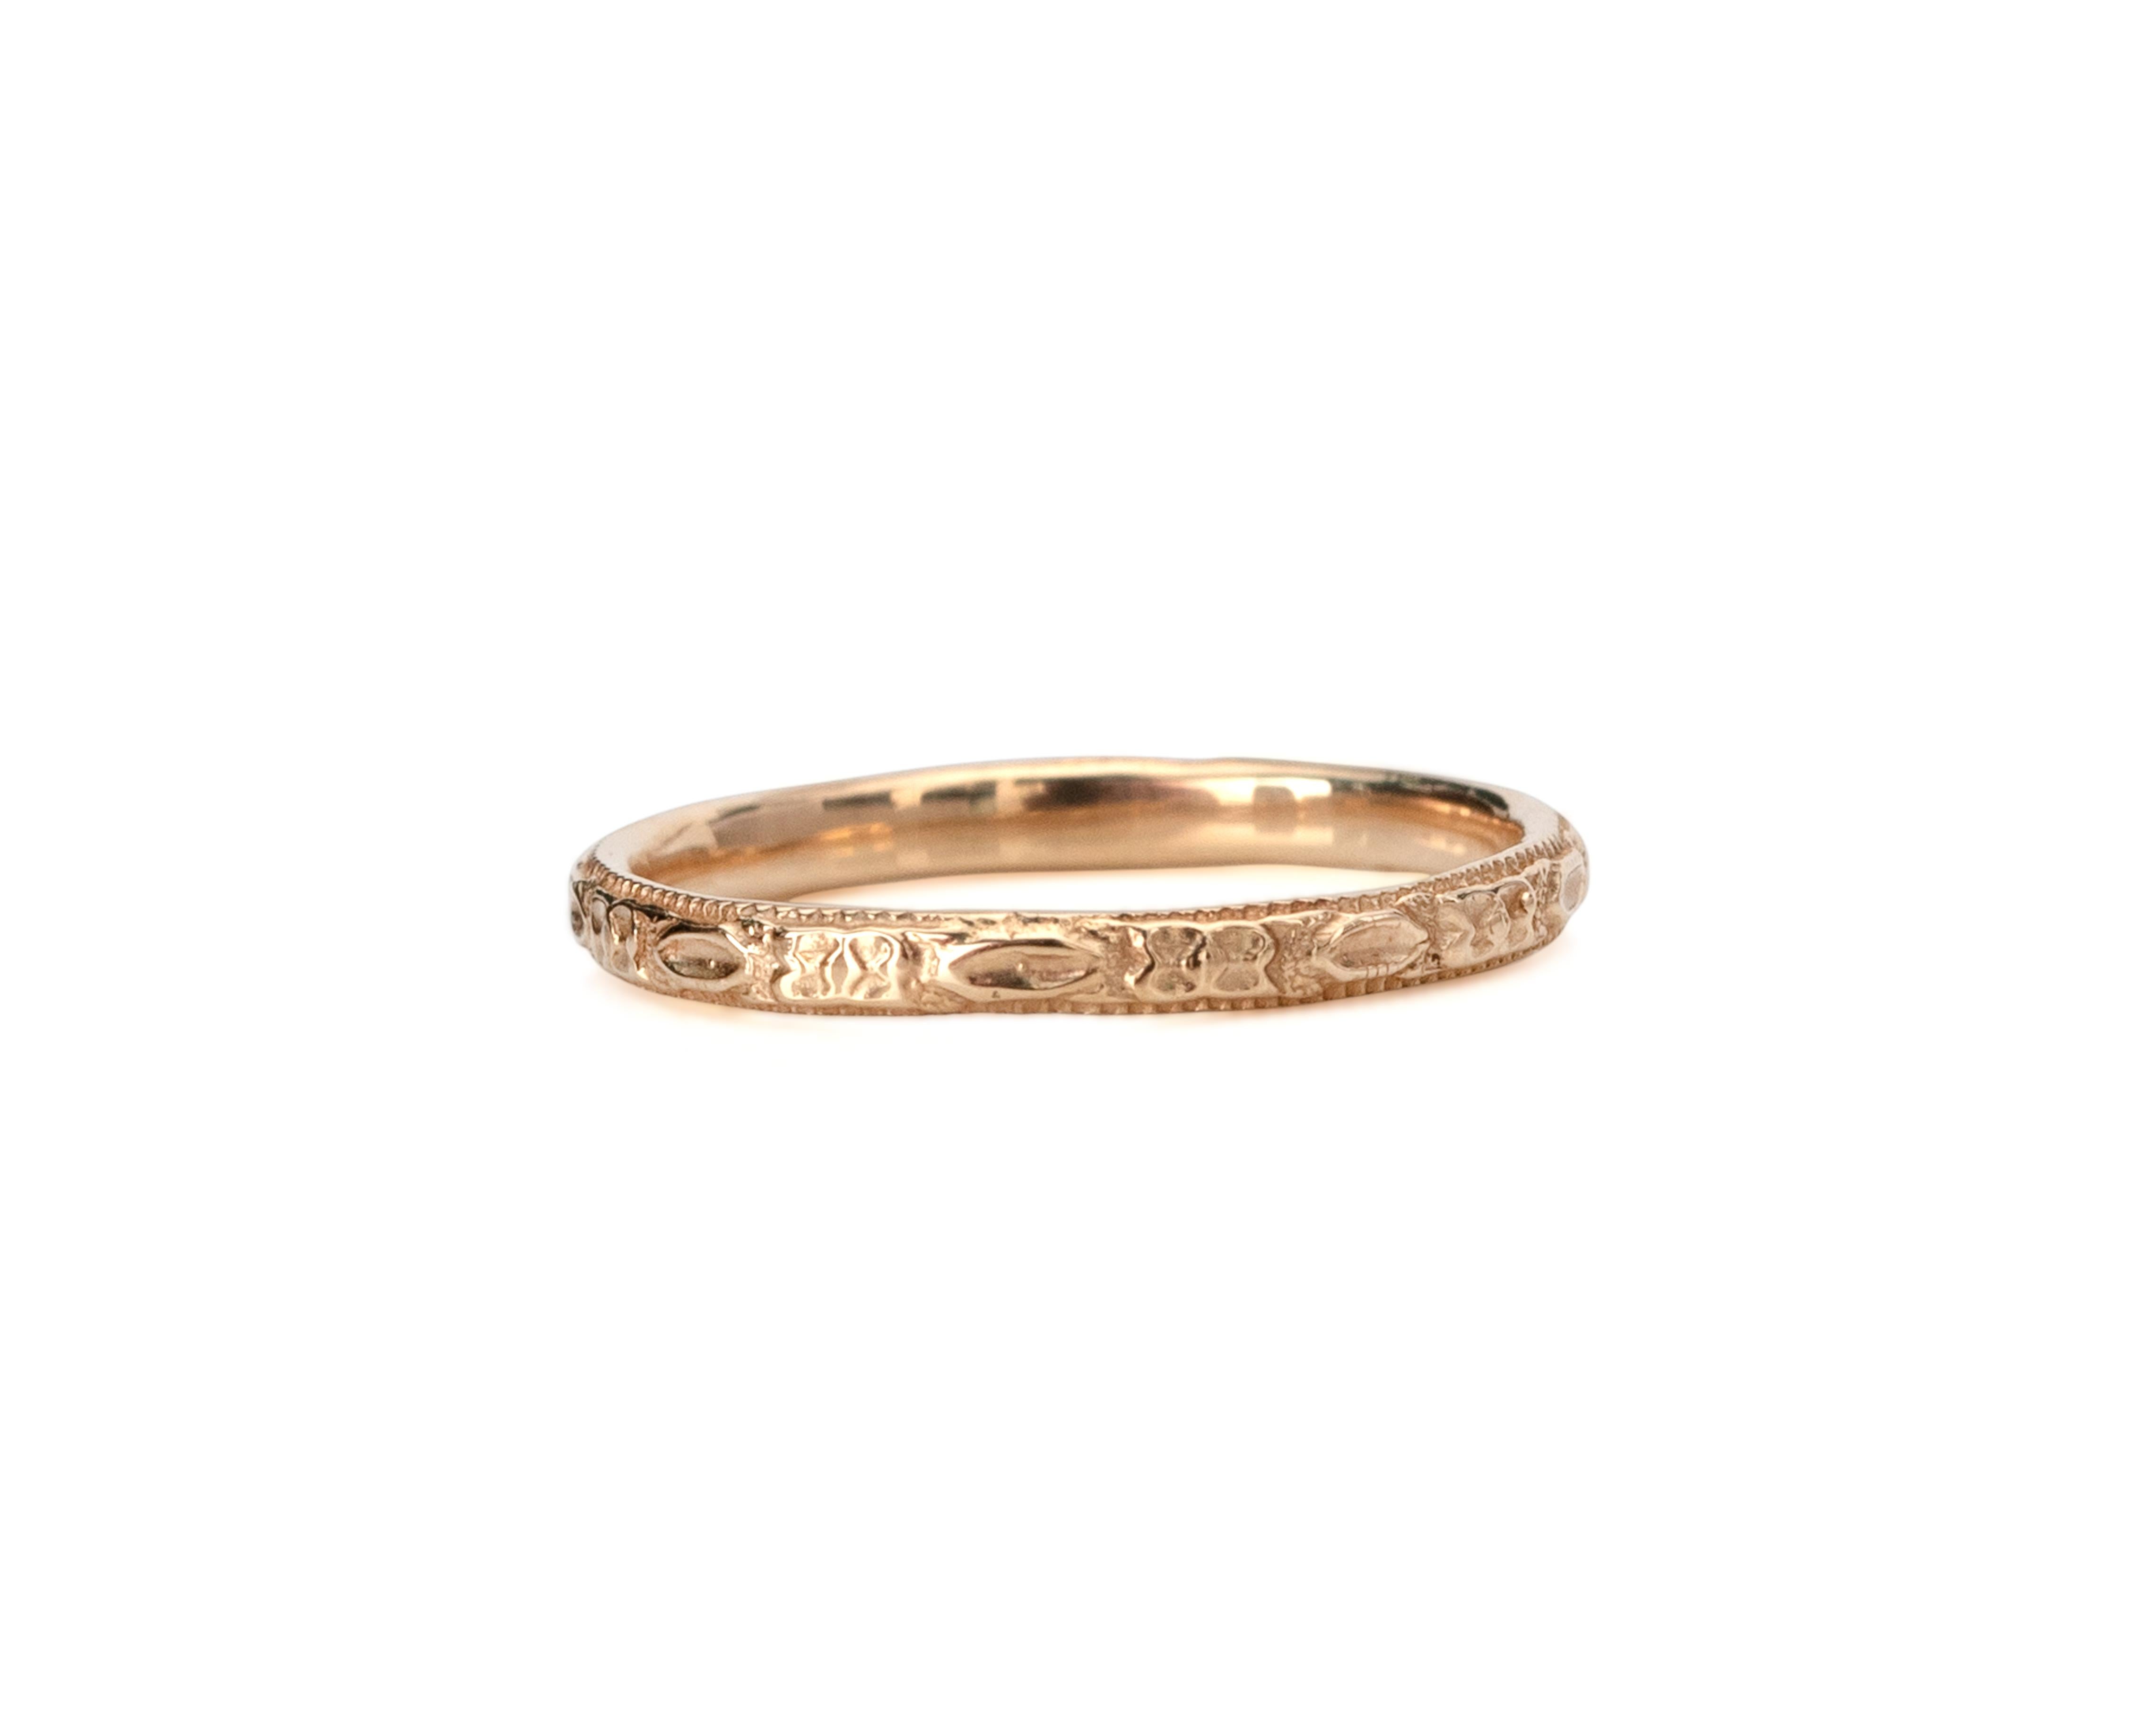 Description: 
This piece is a genuine 1930's yellow gold wedding band! This beautiful dainty band is an excellent example of the early 20th-century style! Likely from the 1930's this Art Deco beauty features a floral carved design all of the way